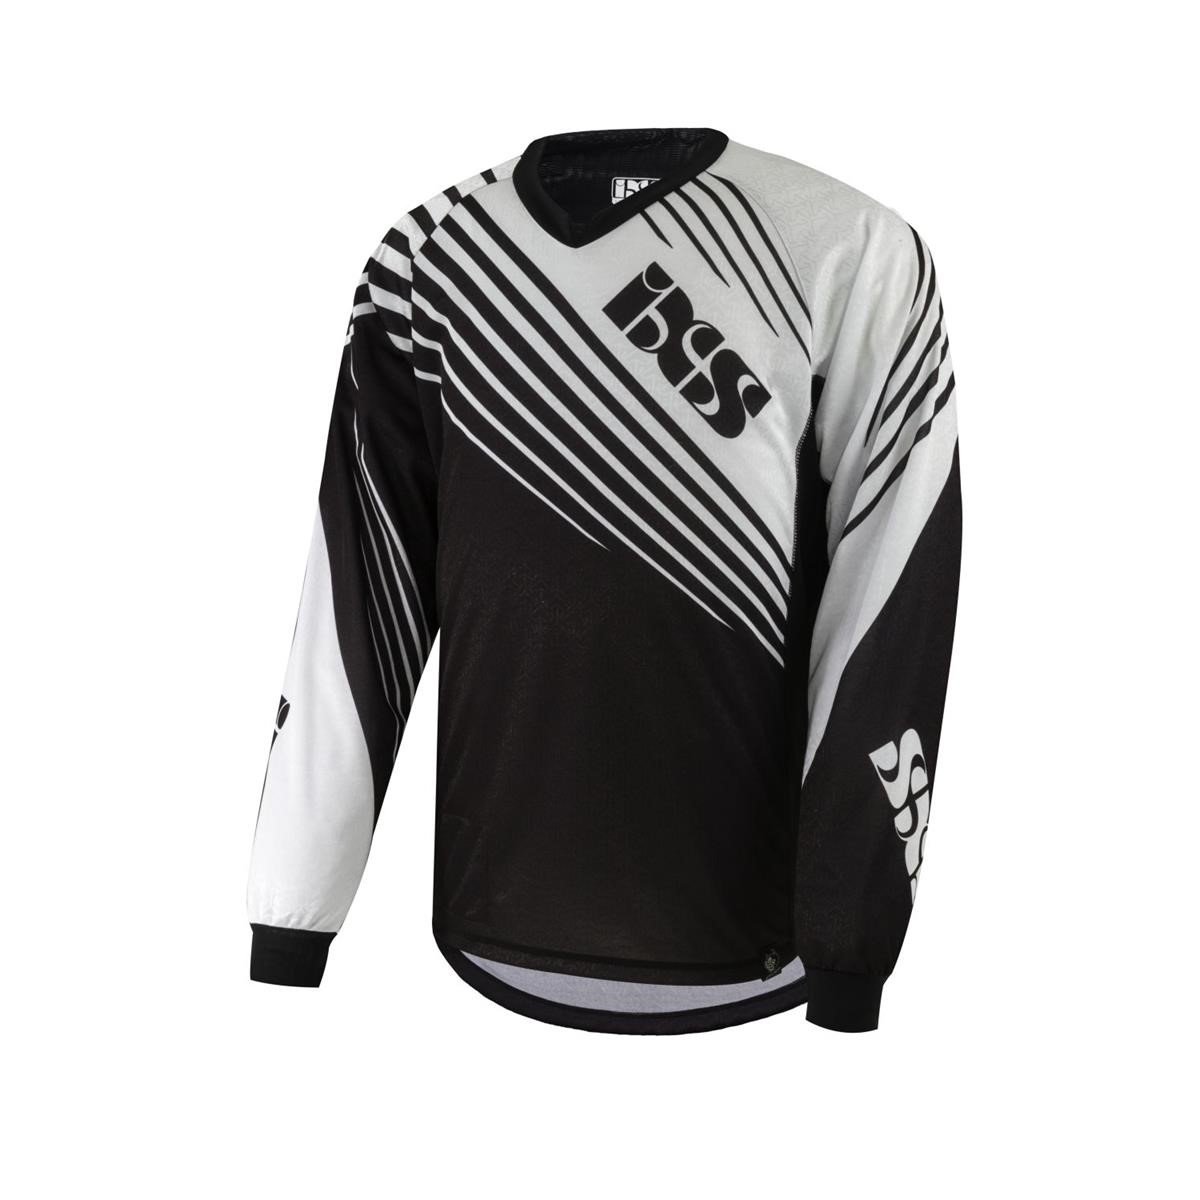 youth cycling clothing